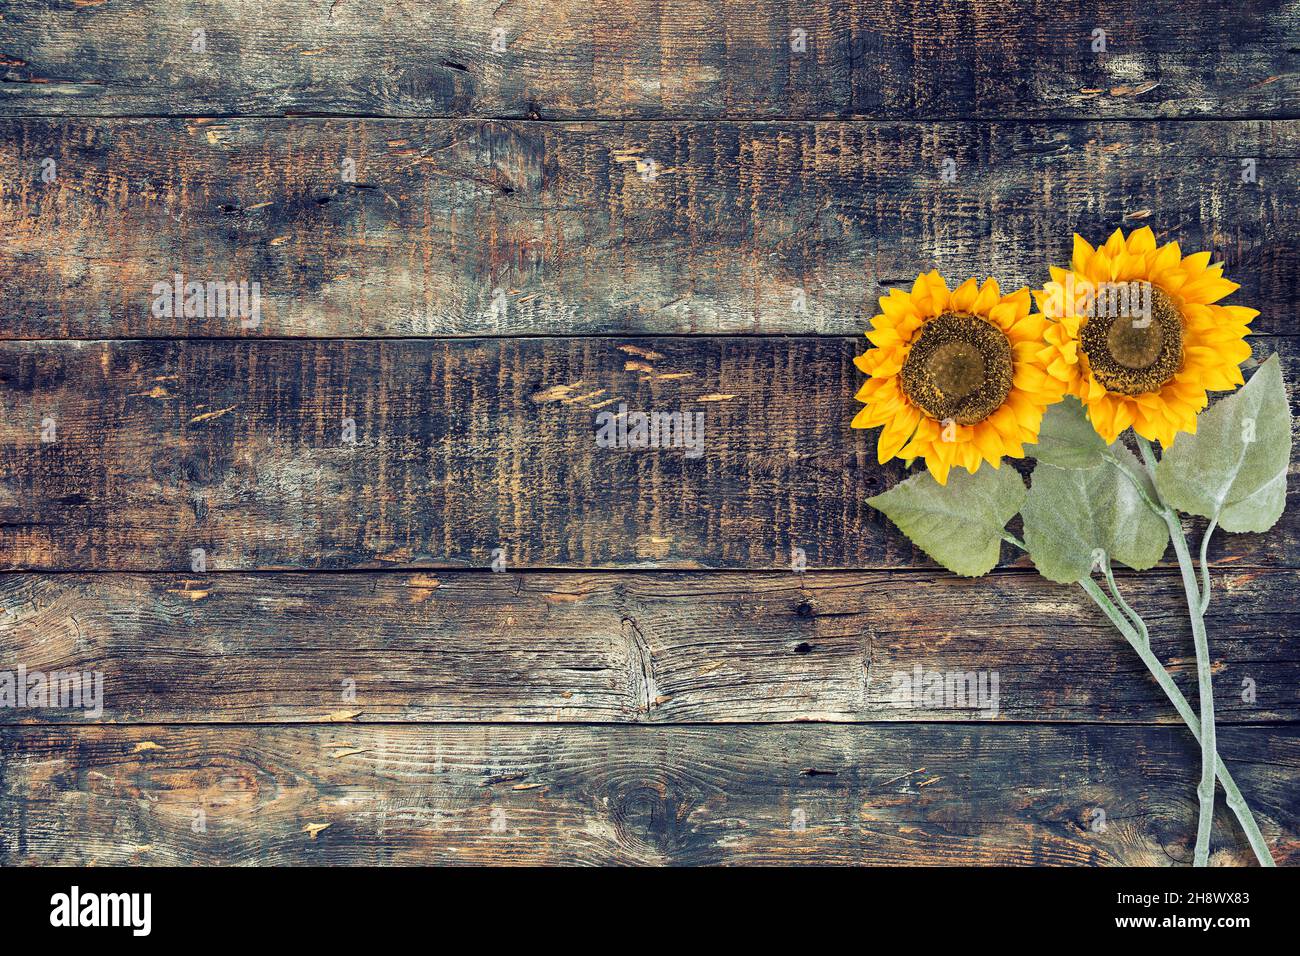 Wooden background with sunflowers. Wood texture floral decoration Stock ...